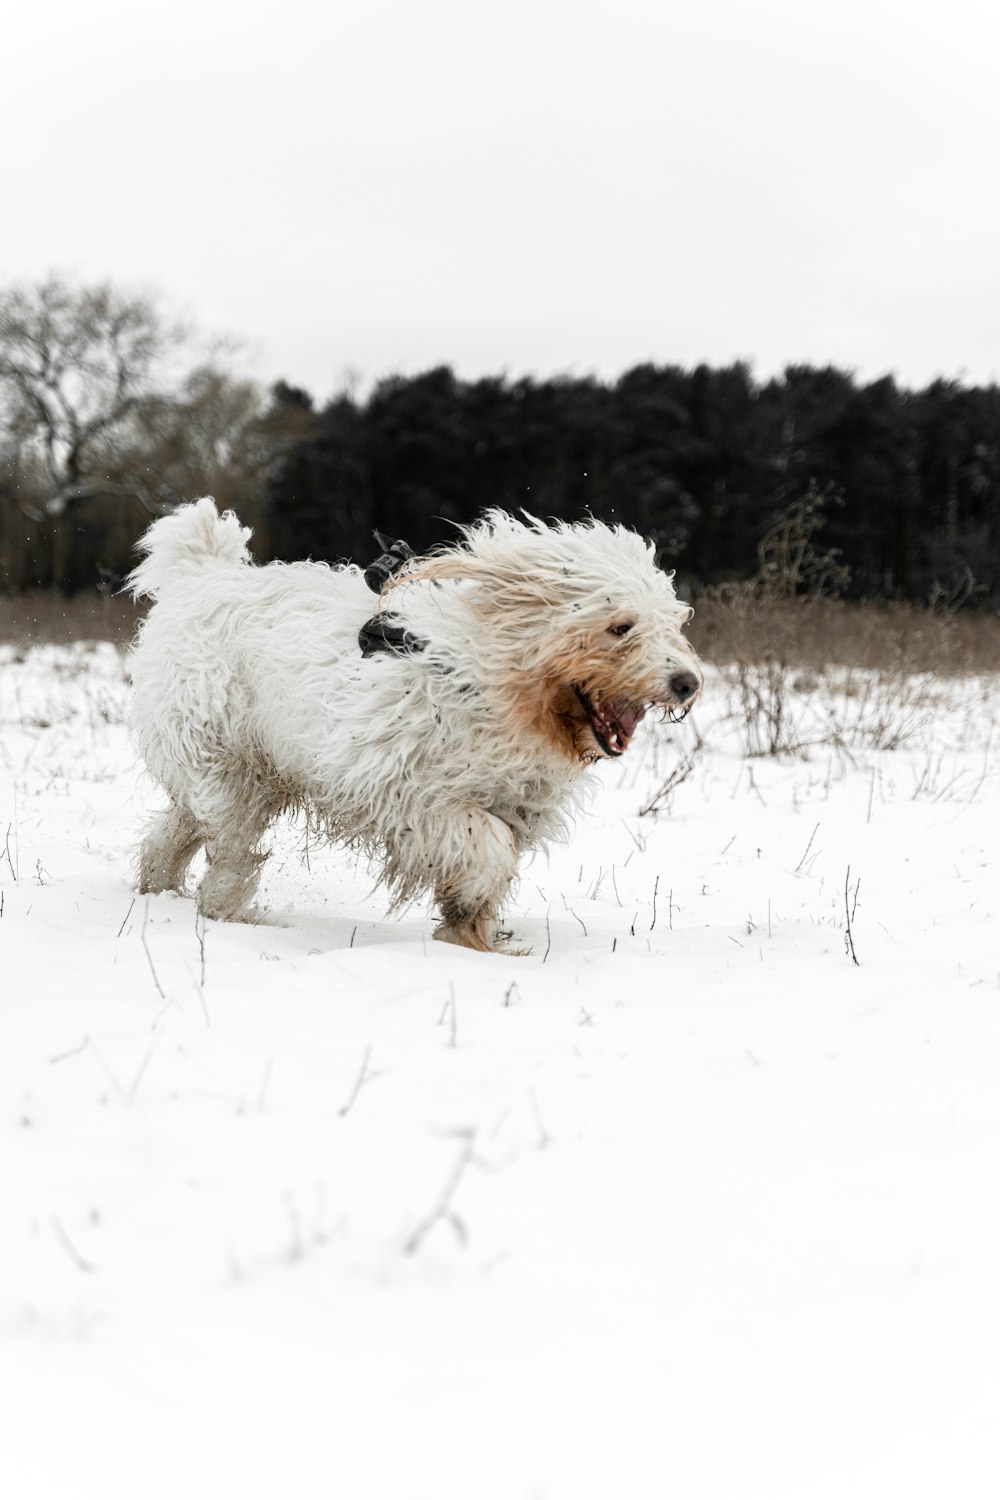 white long coat small dog running on snow covered ground during daytime